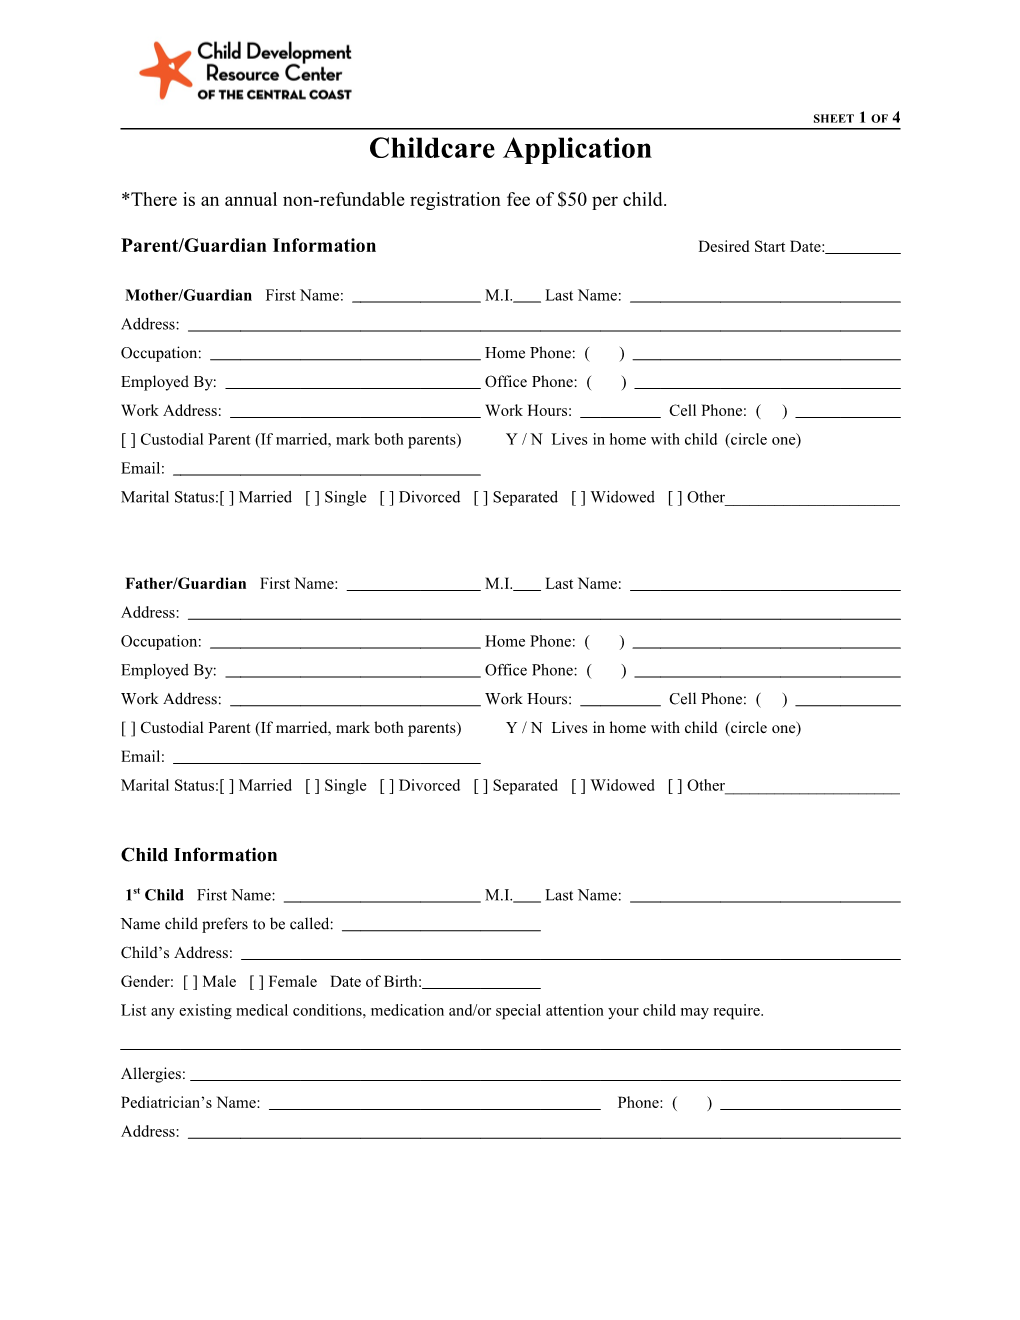 Childcare Application